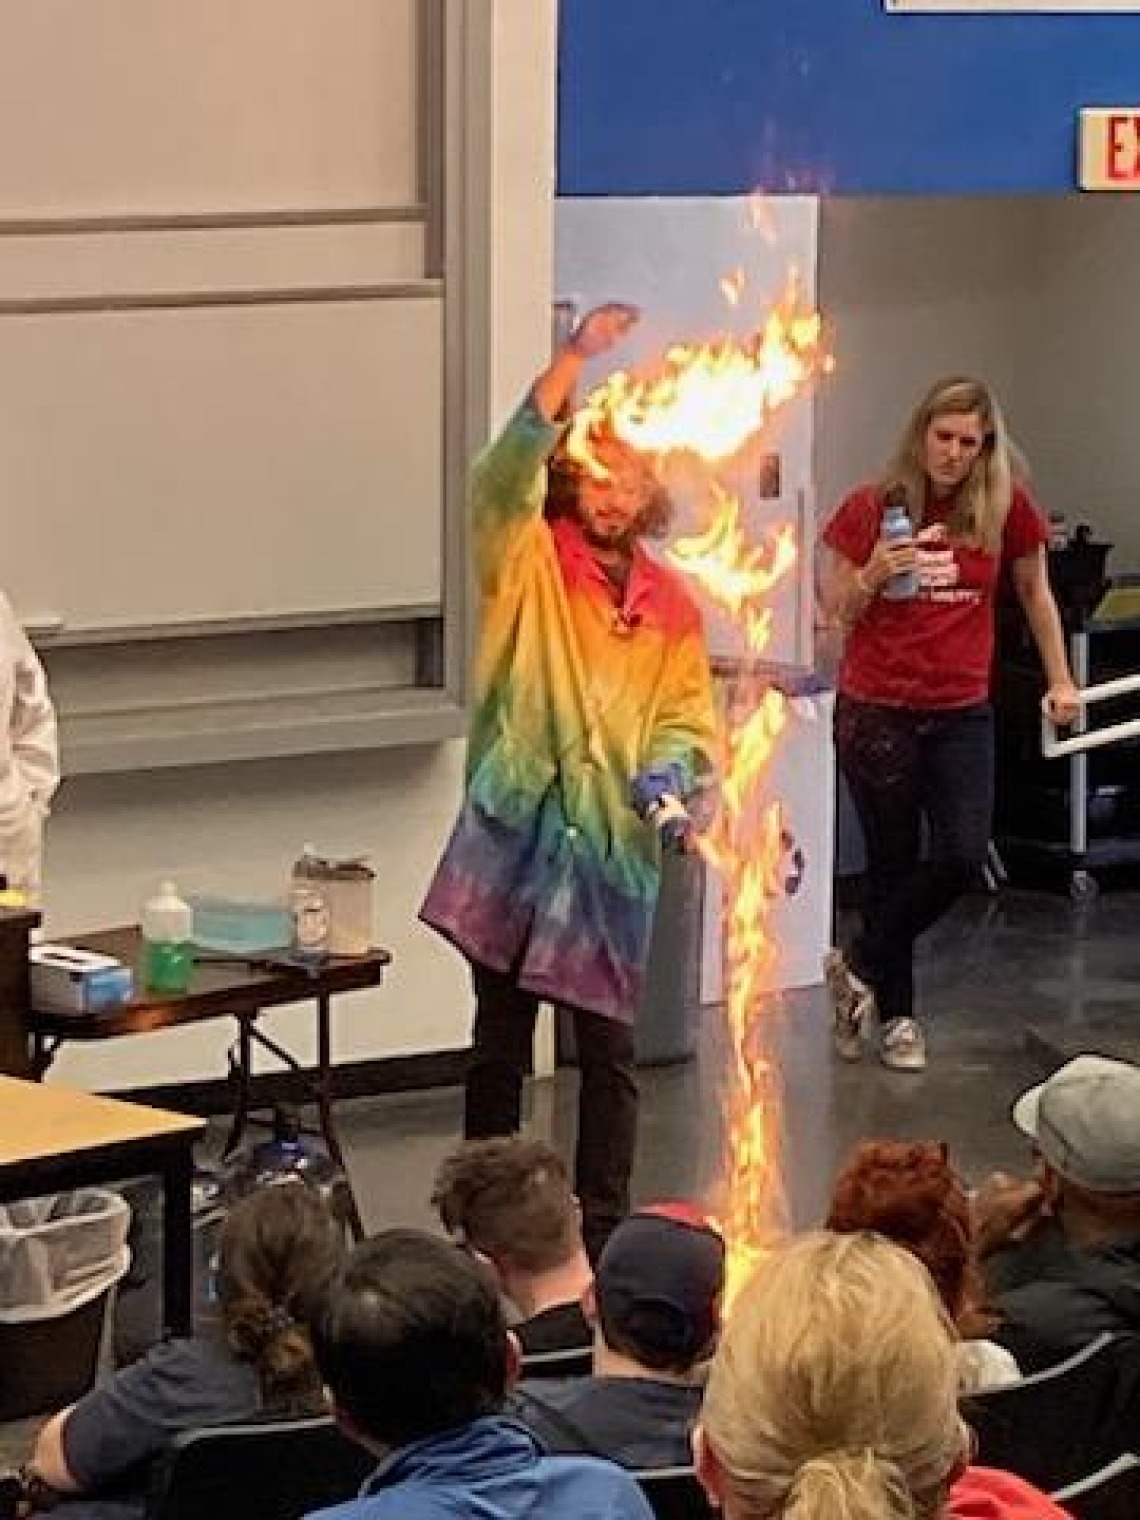 Flames jump close to 6 ft in the air during a chemistry magic show